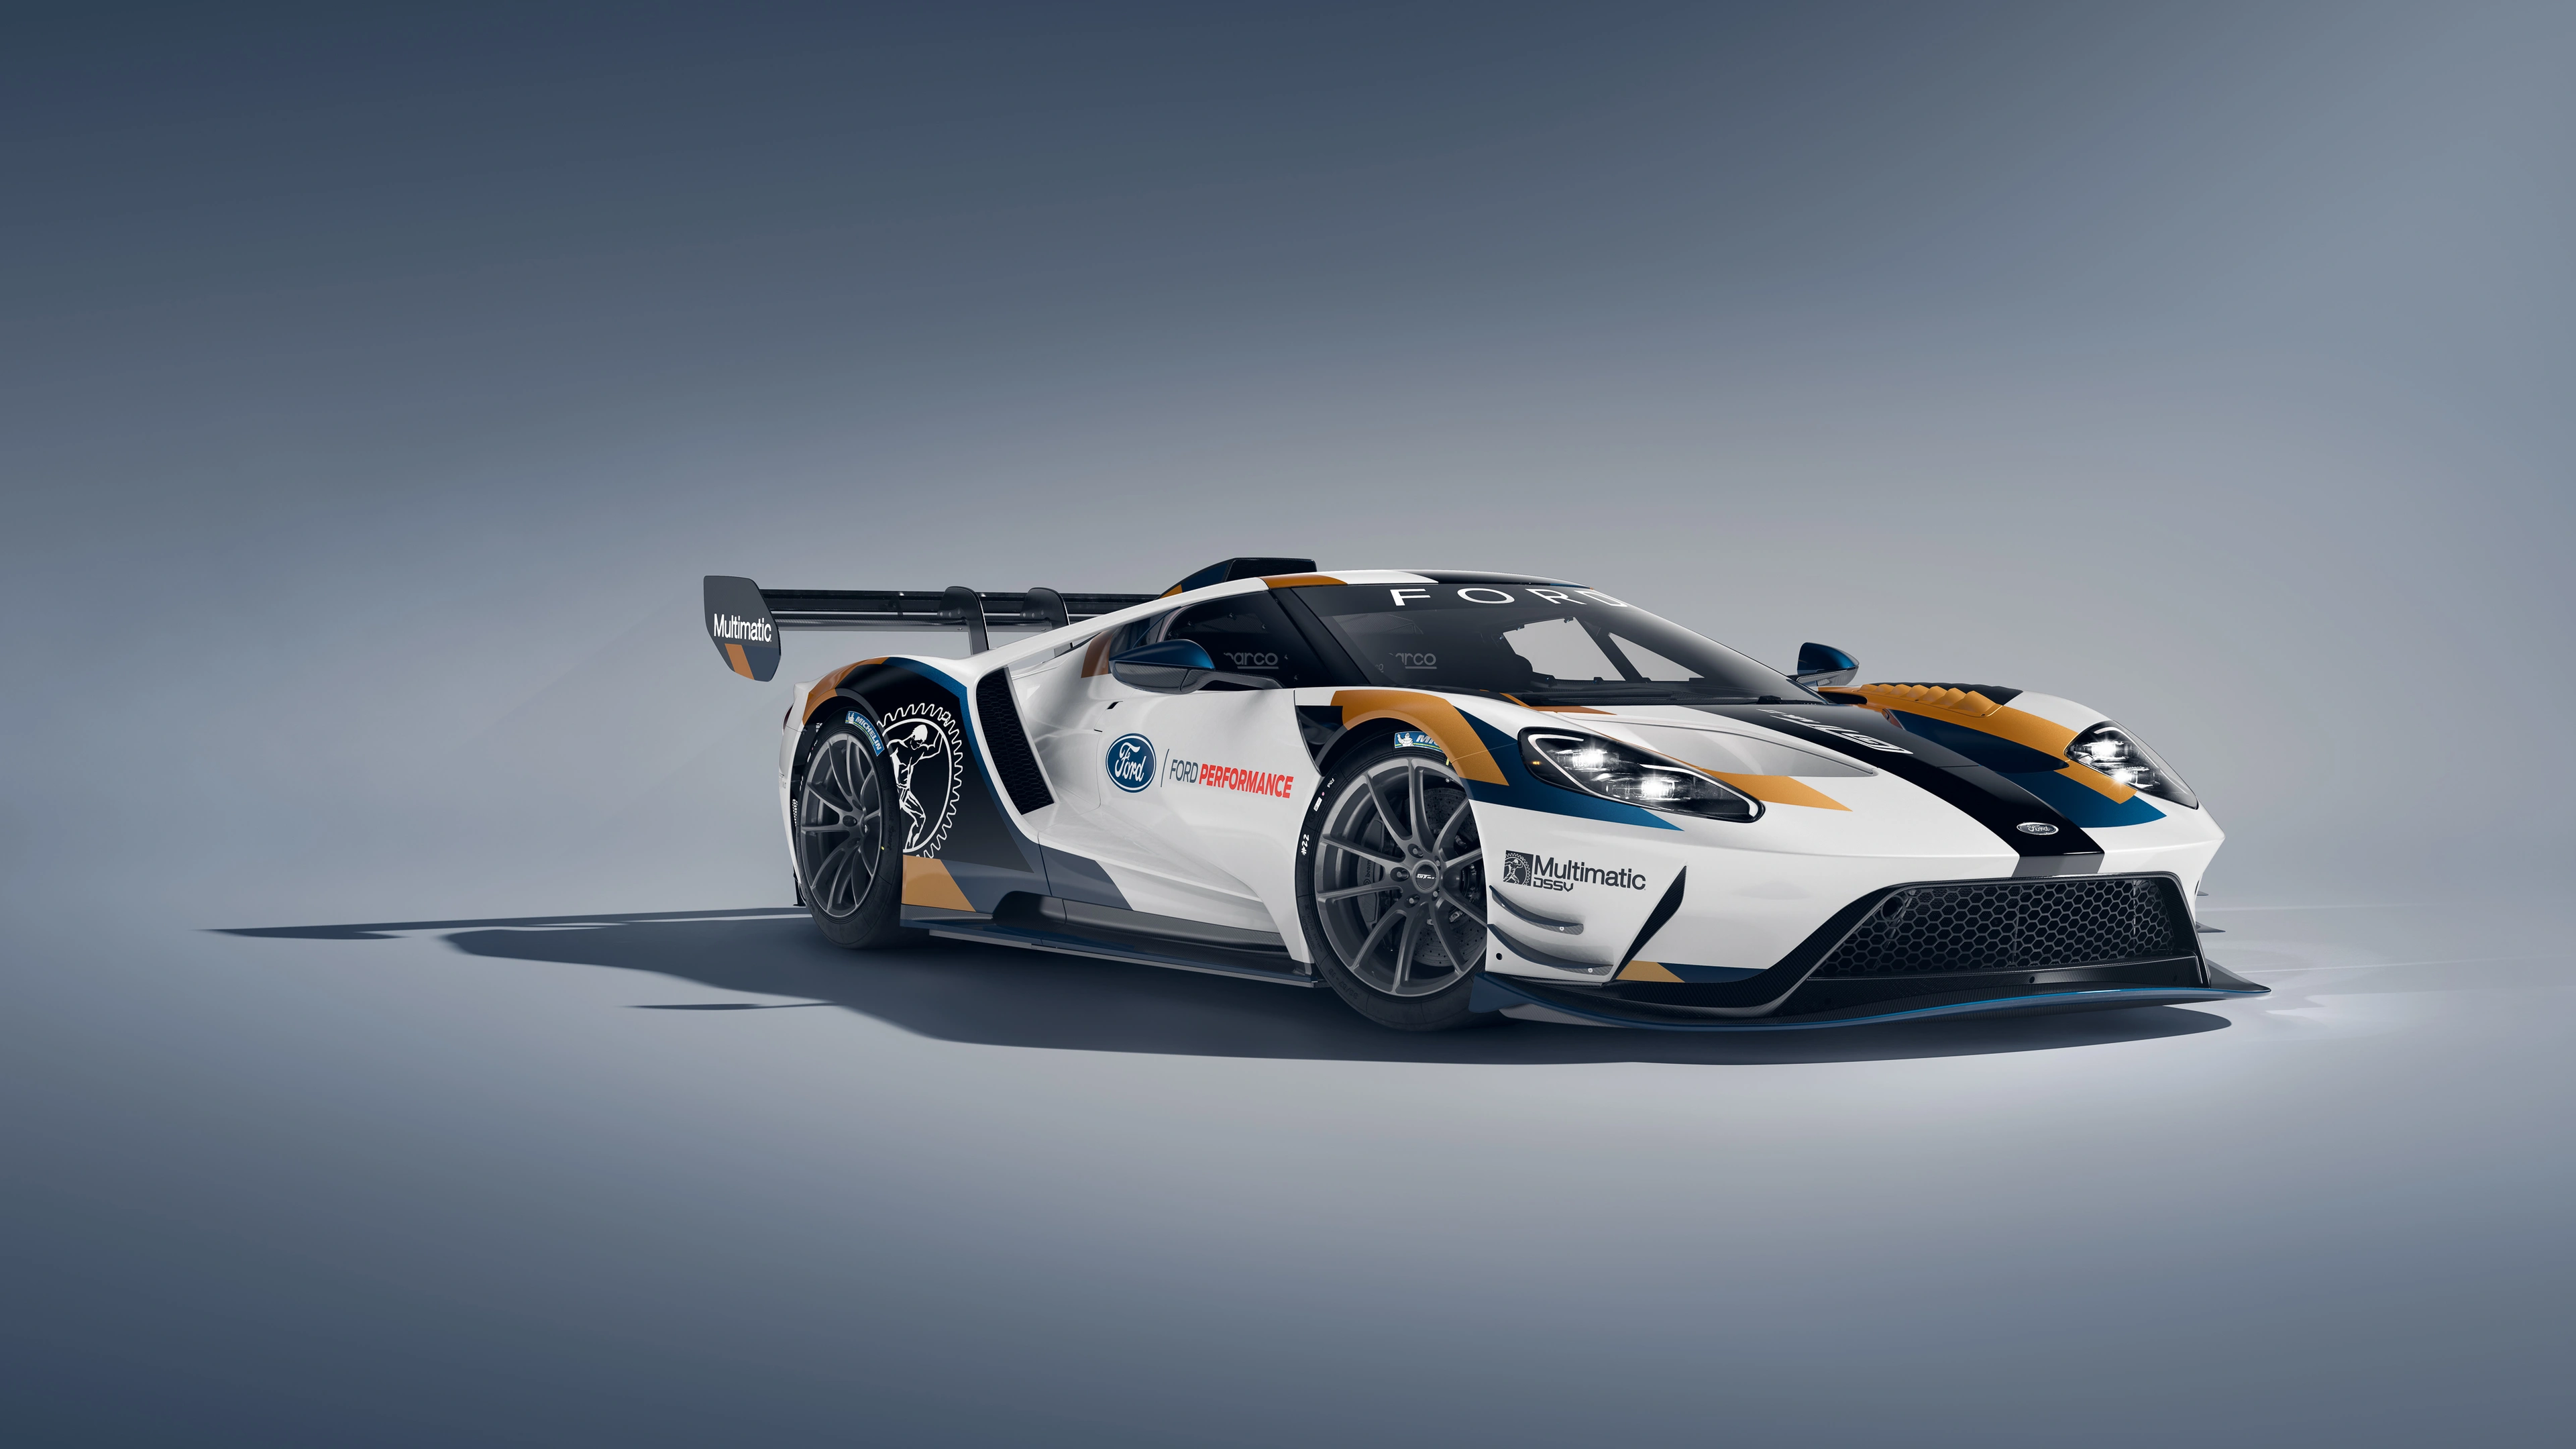 2019 ford gt mk2 1569188302 - 2019 Ford Gt Mk2 - hd-wallpapers, ford wallpapers, ford gt wallpapers, cars wallpapers, 4k-wallpapers